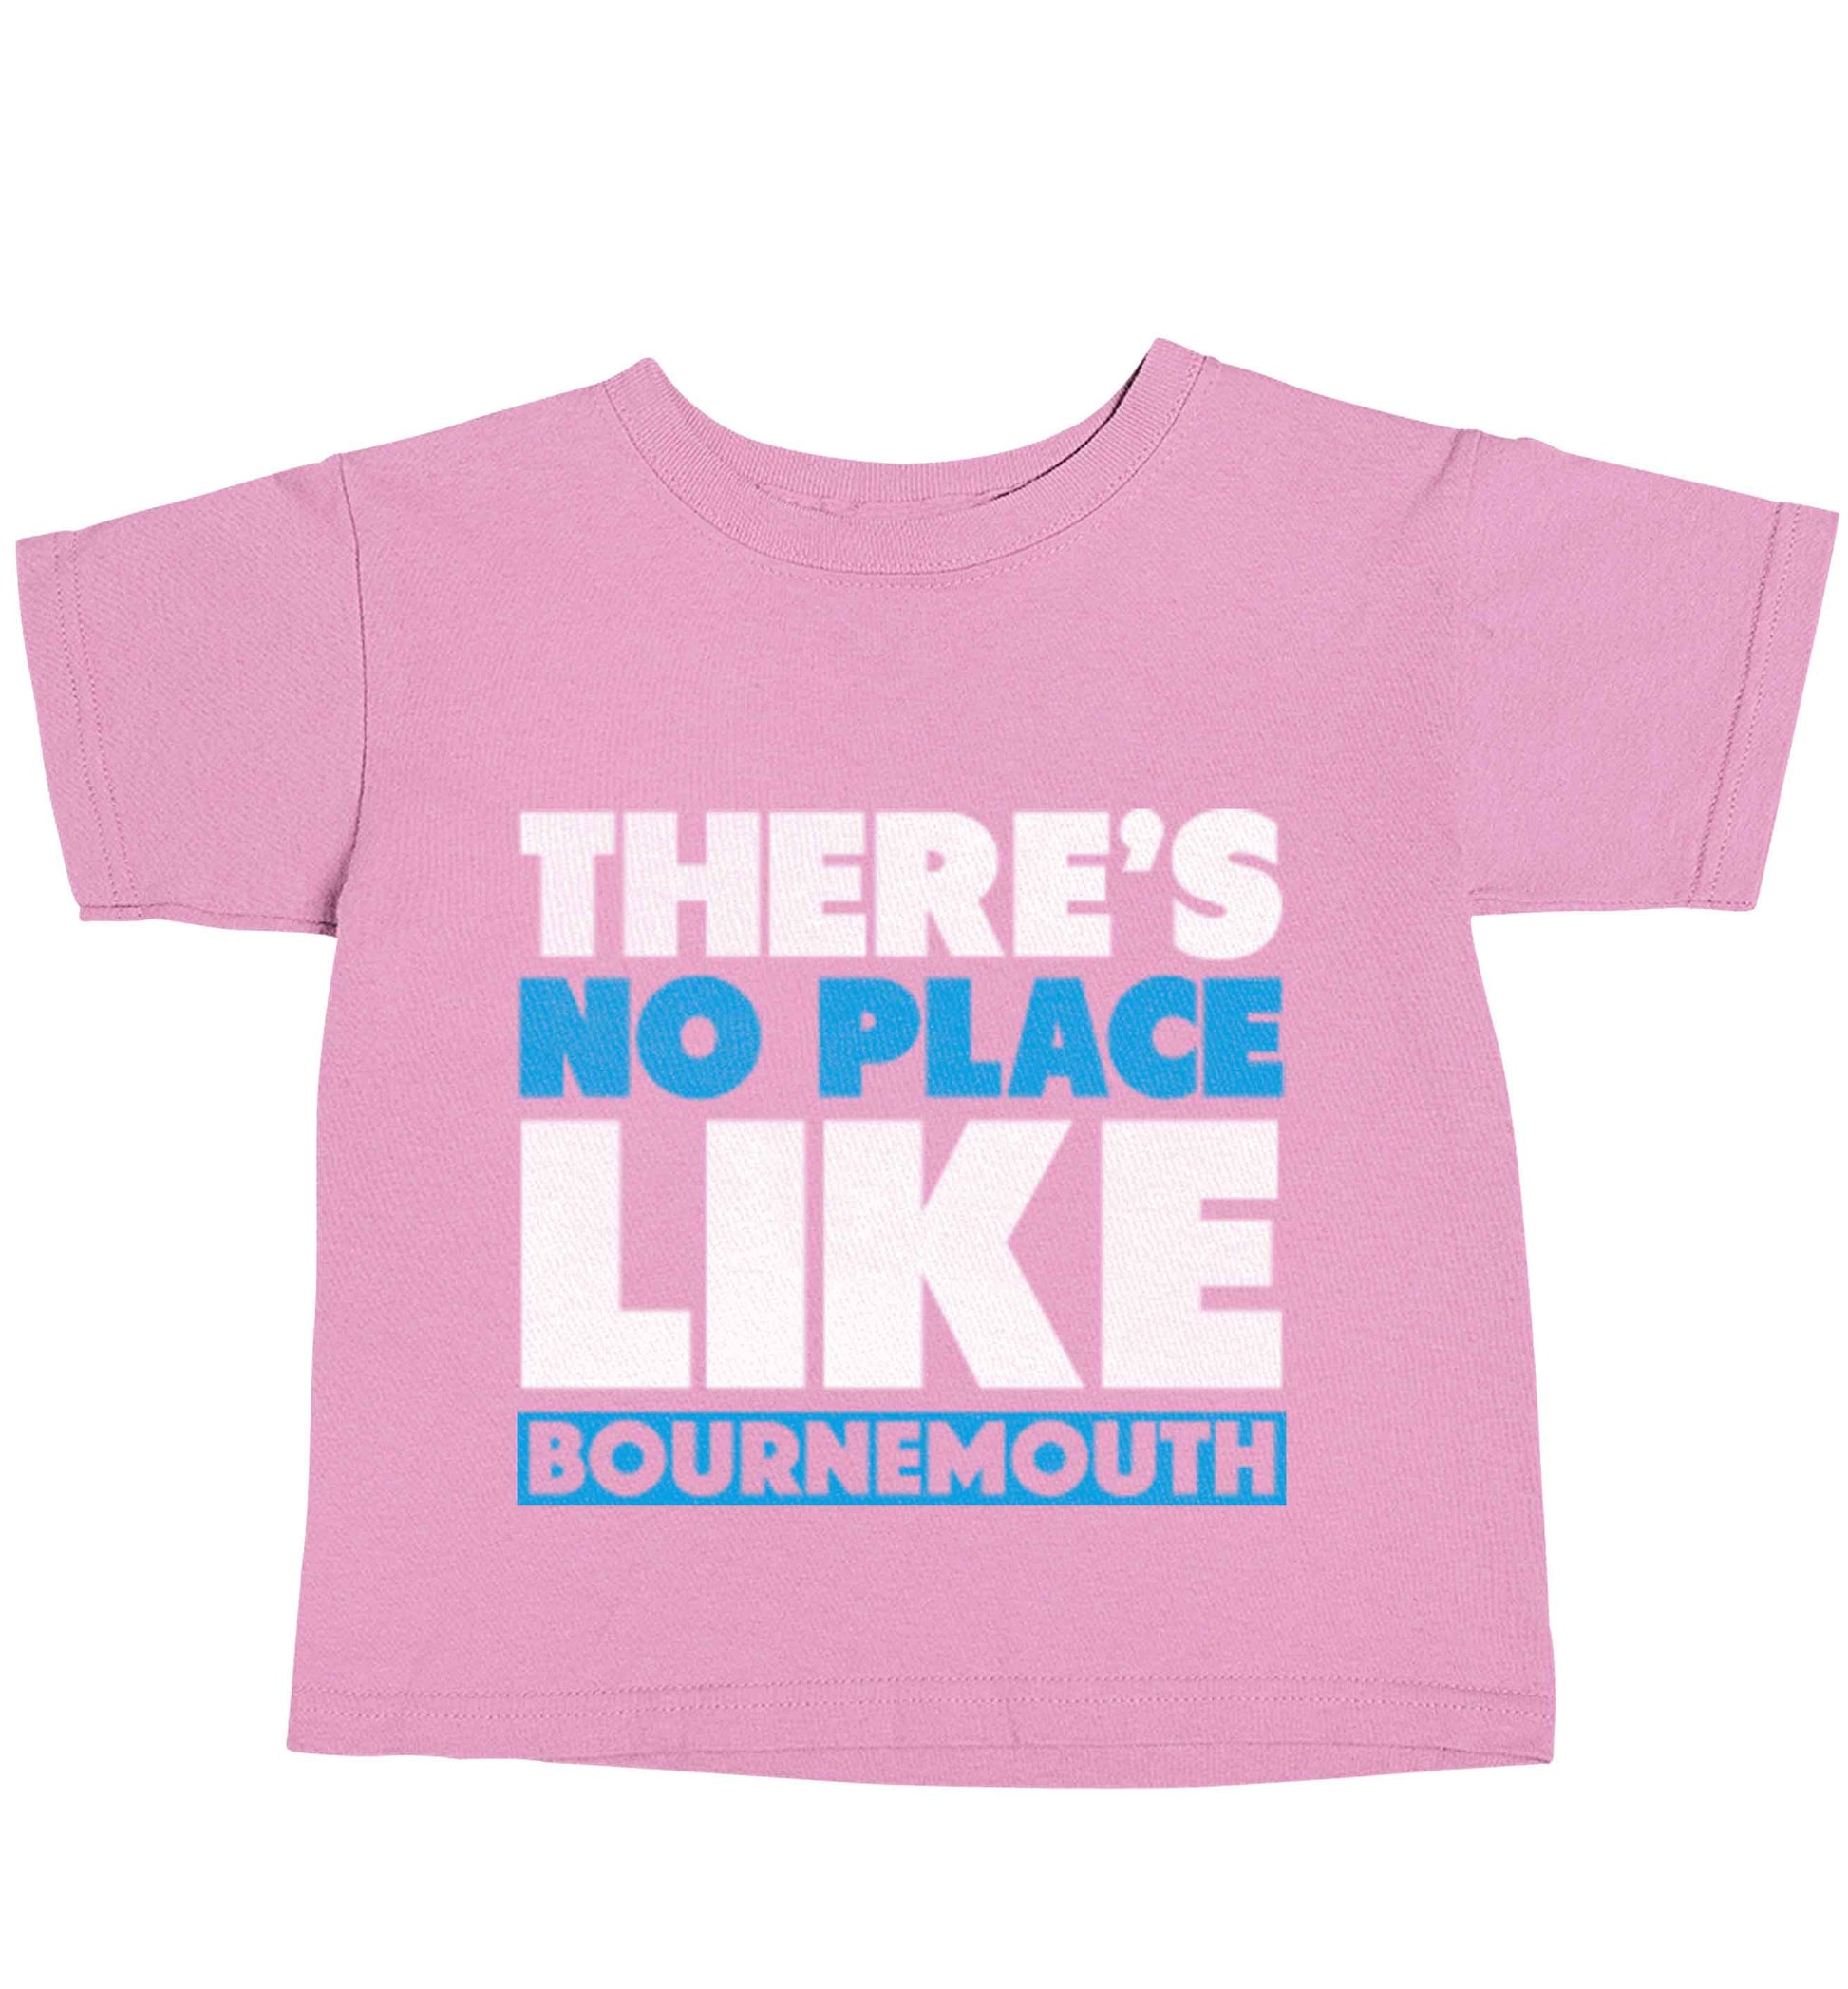 There's no place like Bournemouth light pink baby toddler Tshirt 2 Years